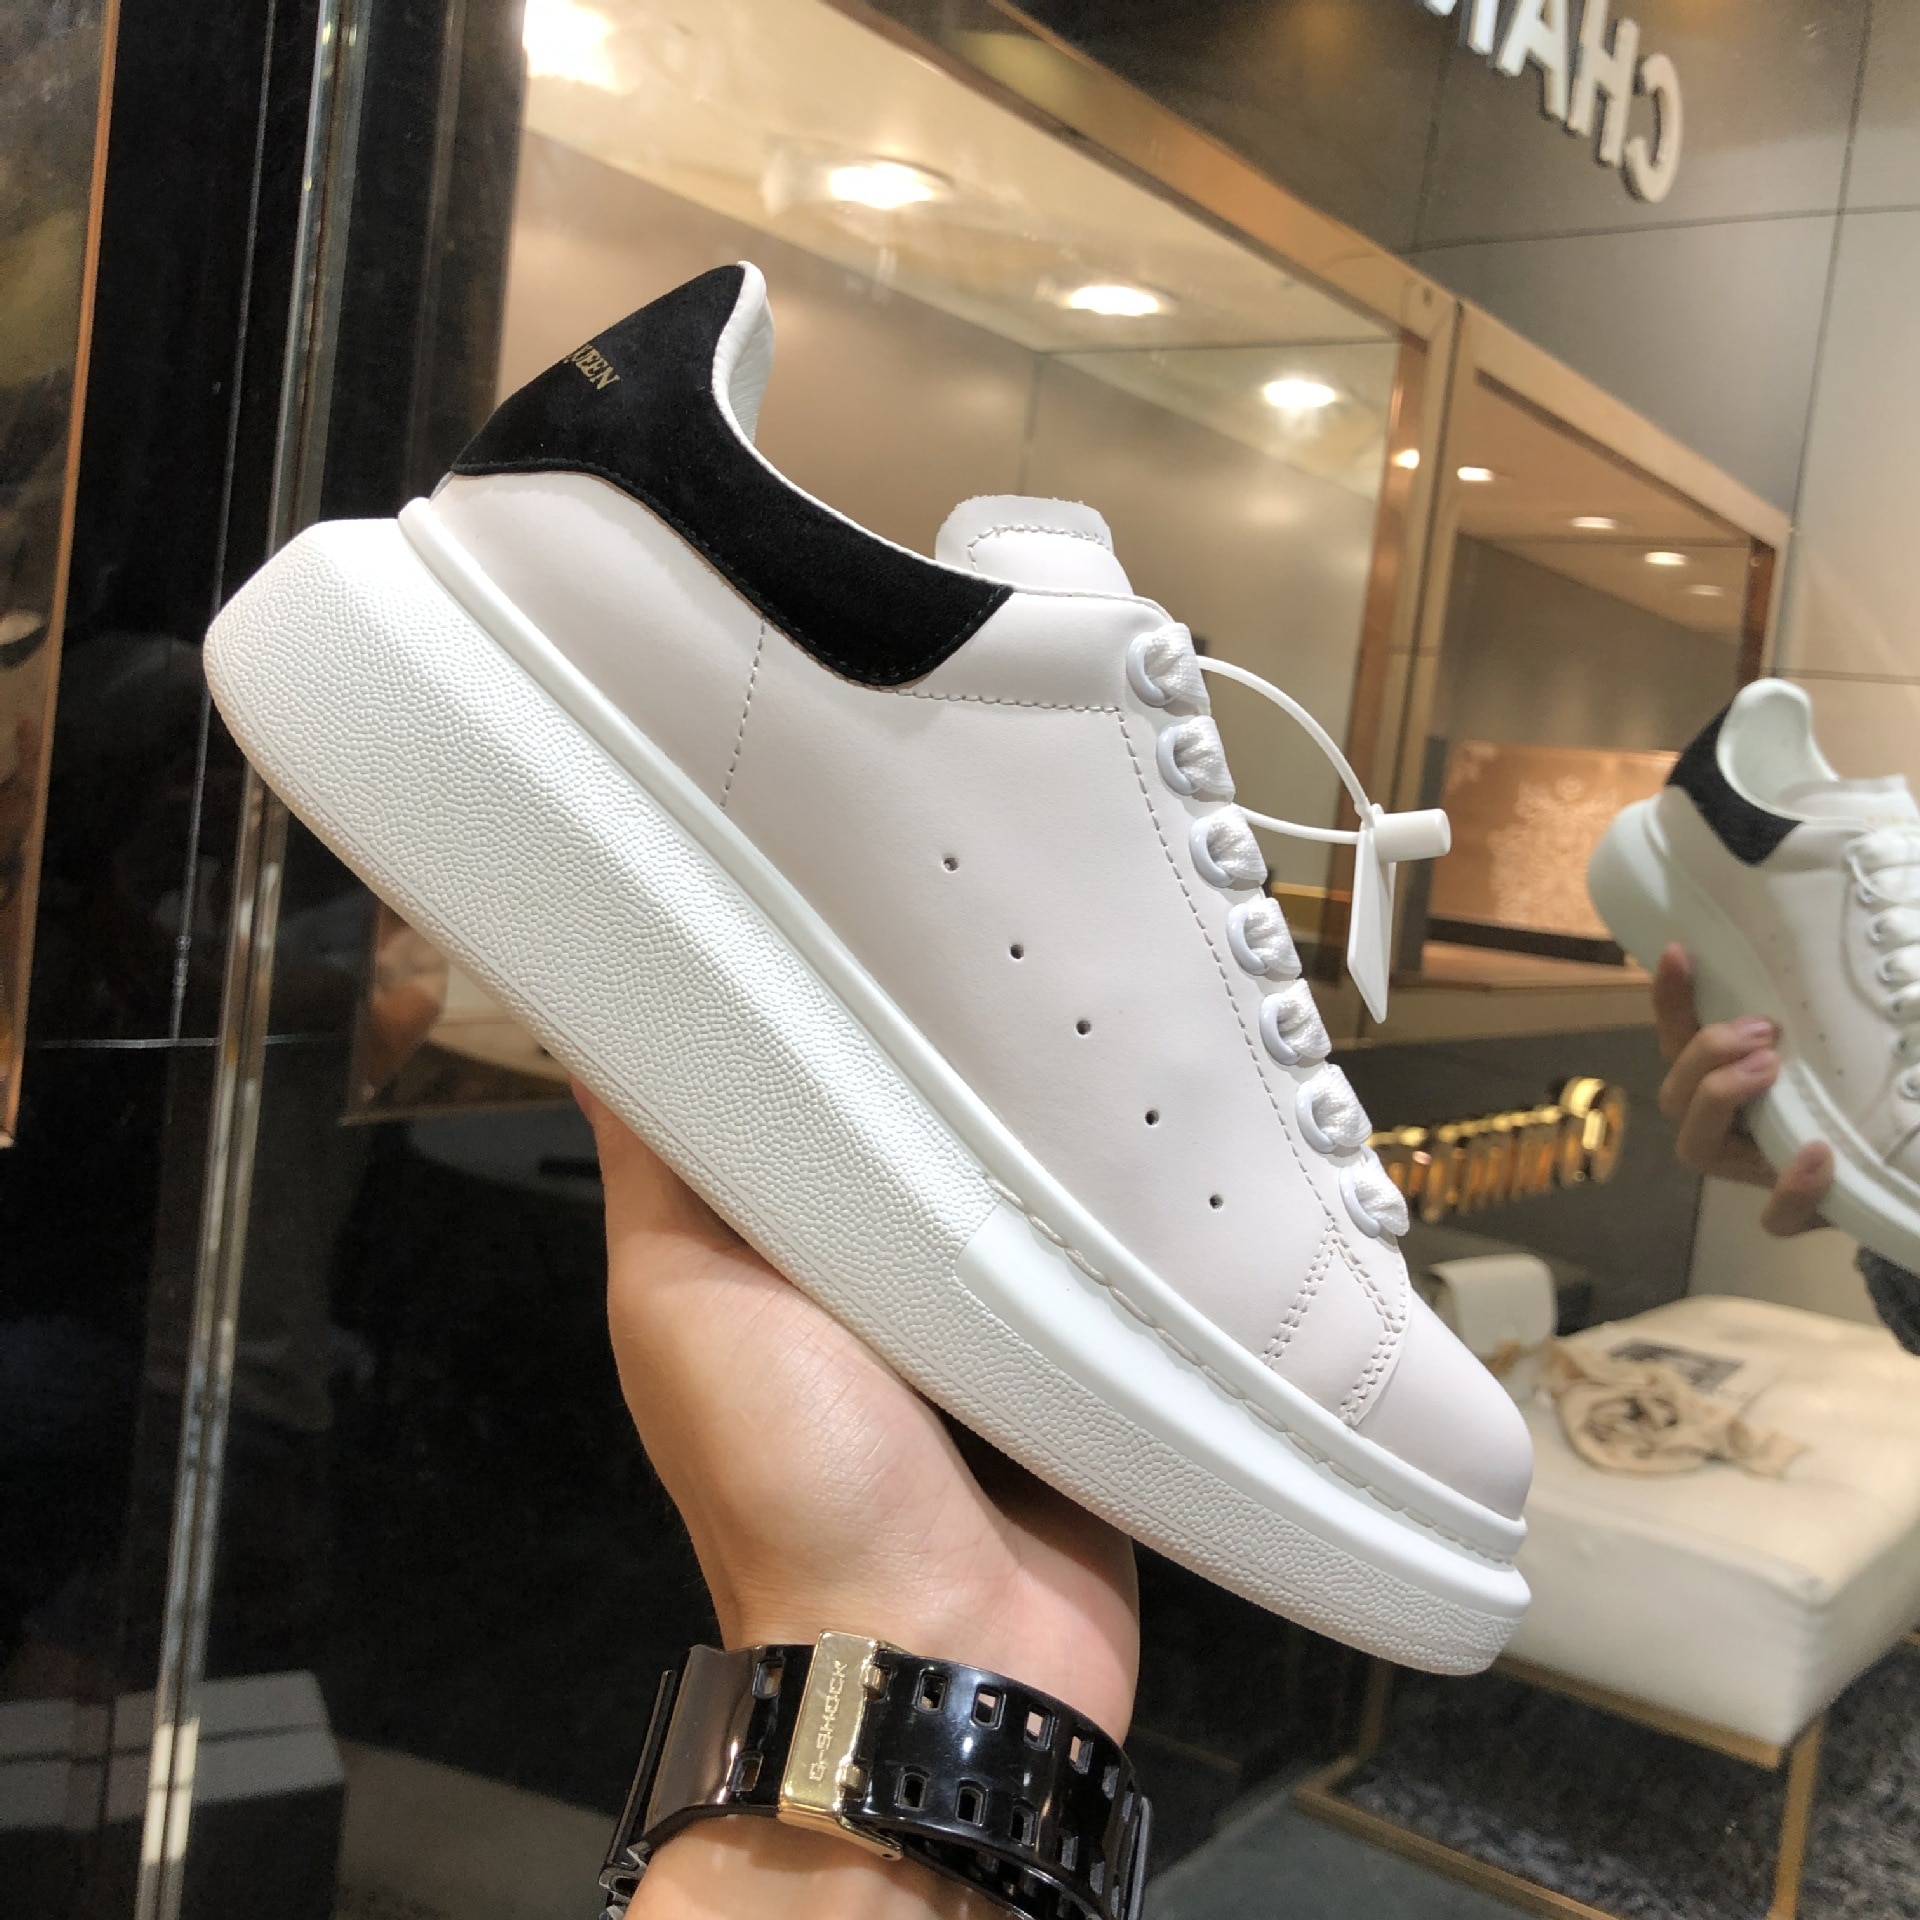 2021 New Couple Shoes Luxury Mcqueen Shoes Women Skateboard Shoes Sports Man Alexander Shoes White Sneakers Increased Platform